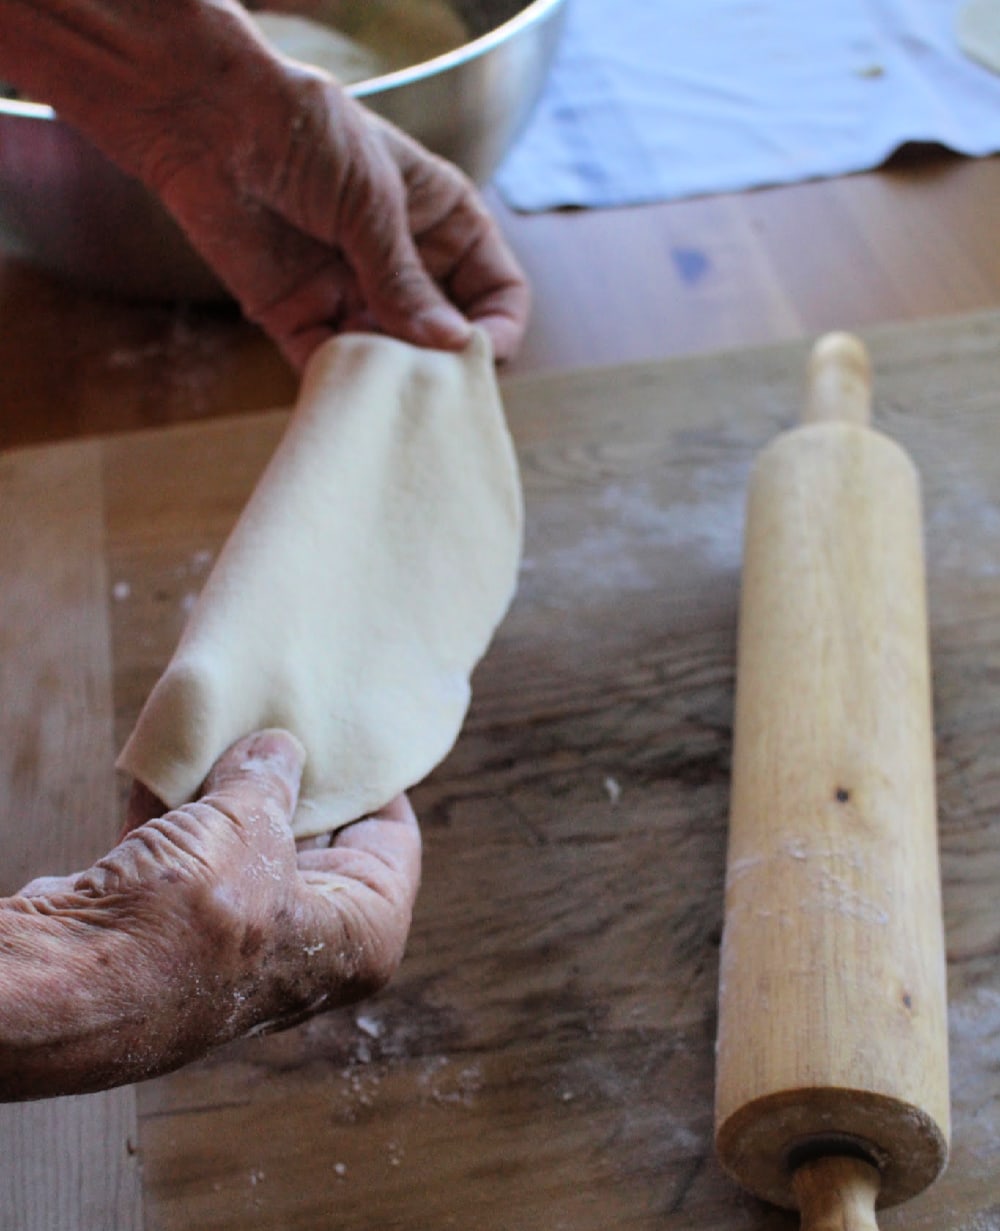 Hands stretching out the Buñuelos dough. 